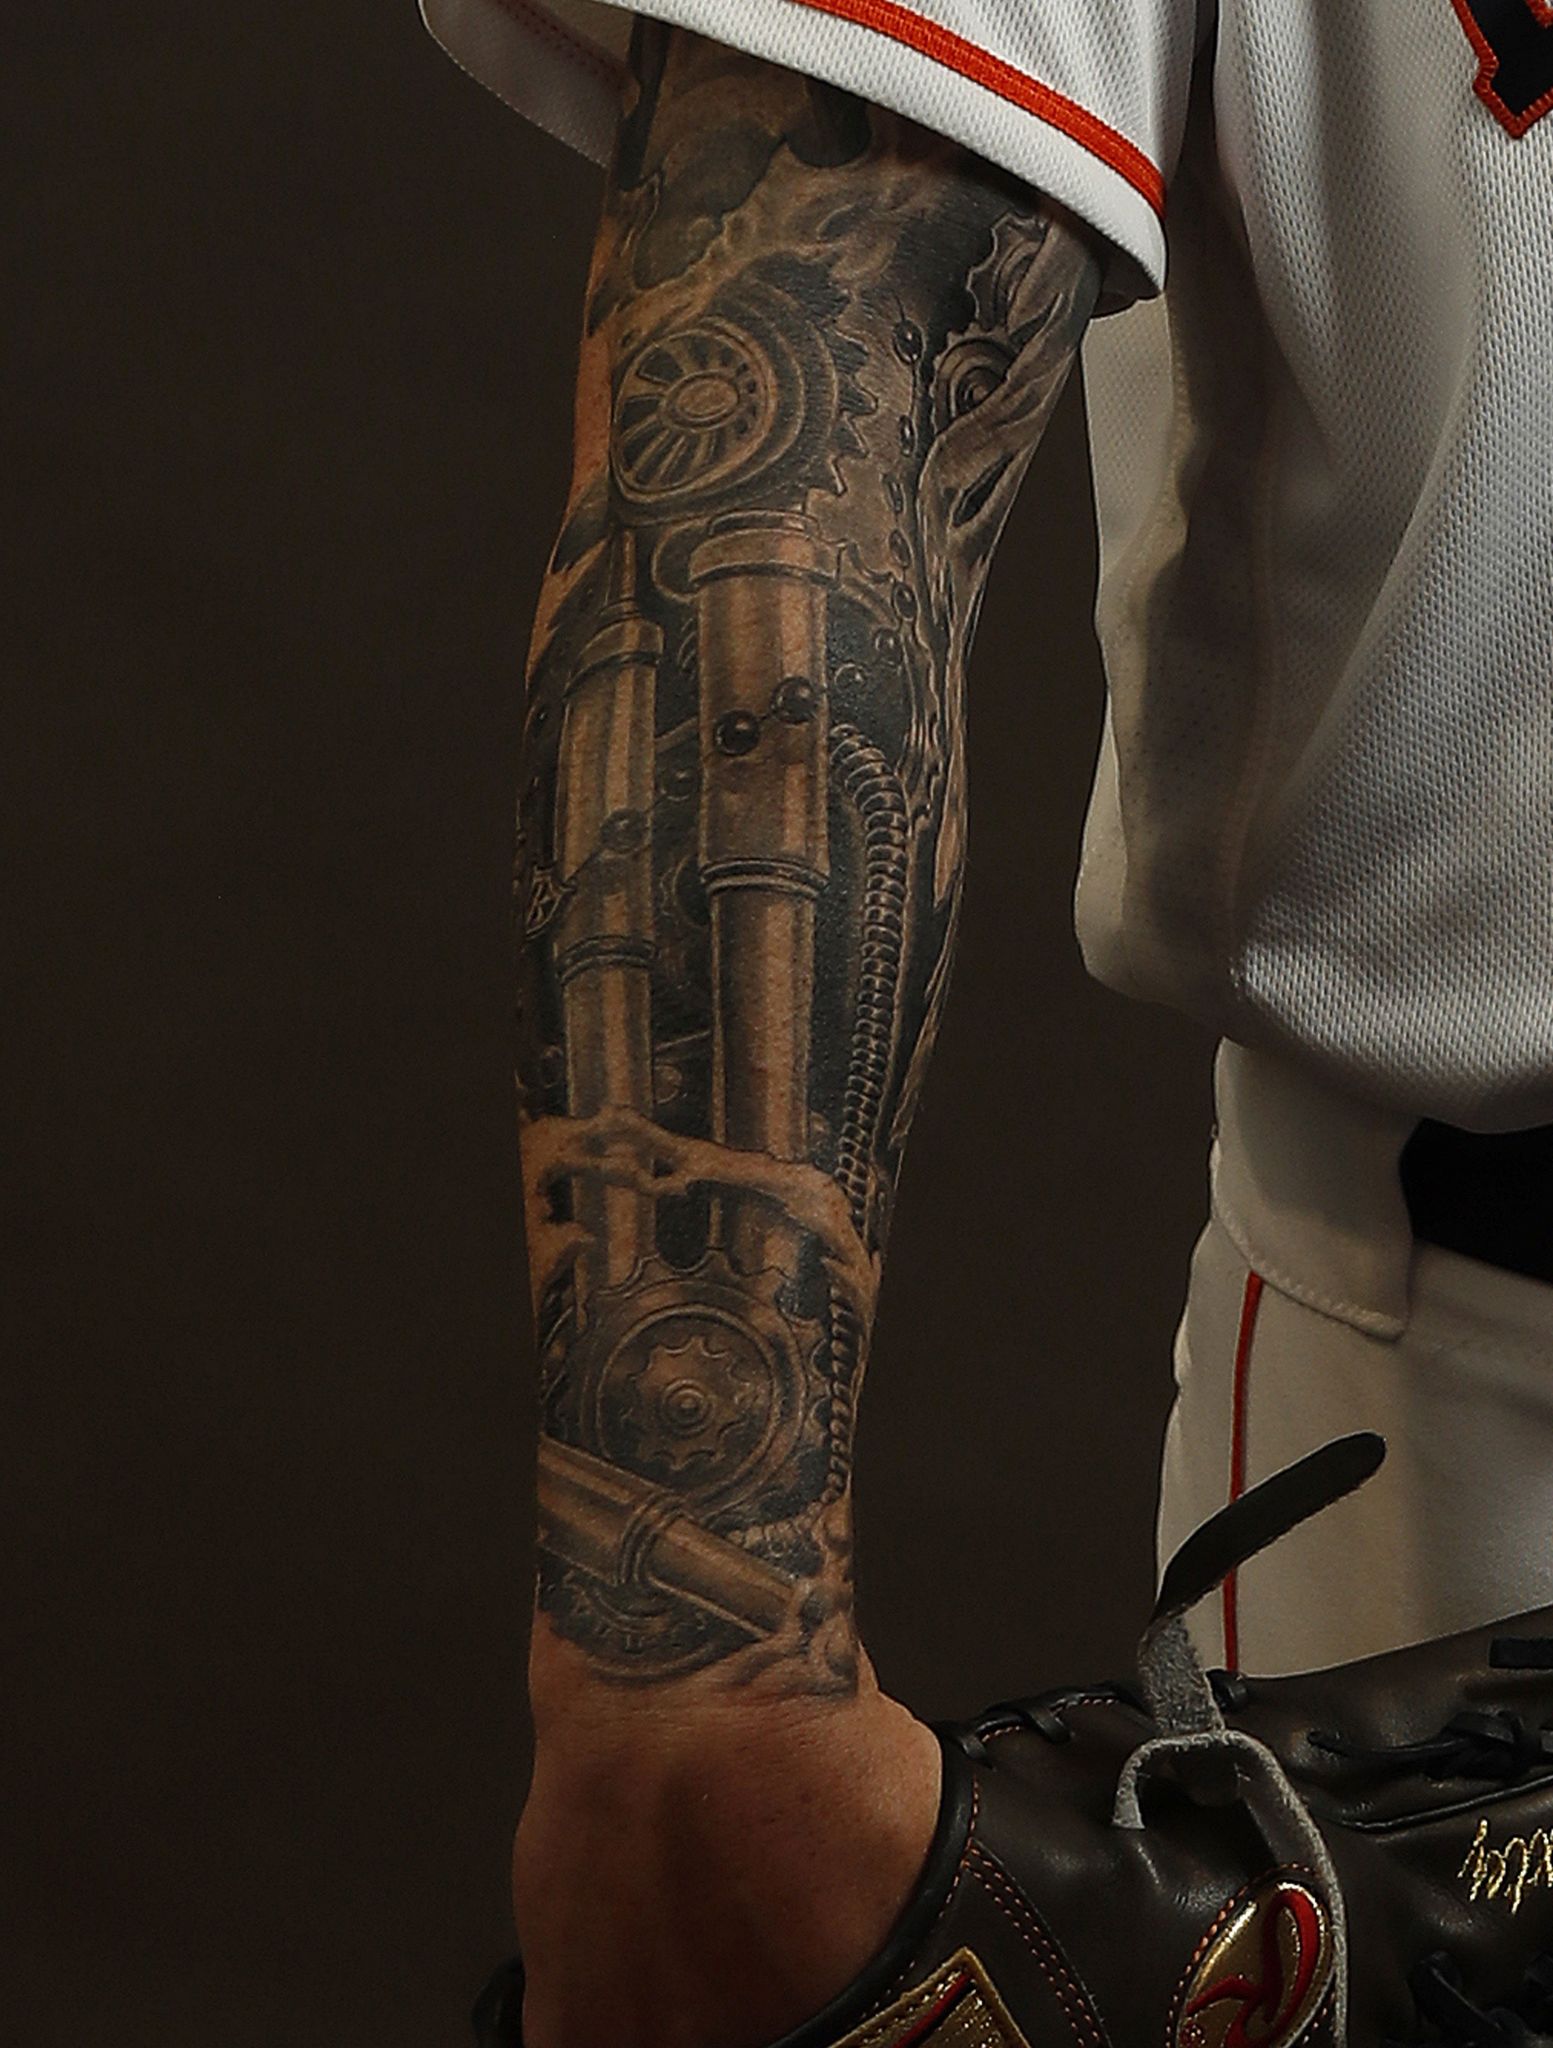 There is now photo evidence of the tattoo Carlos Correa was